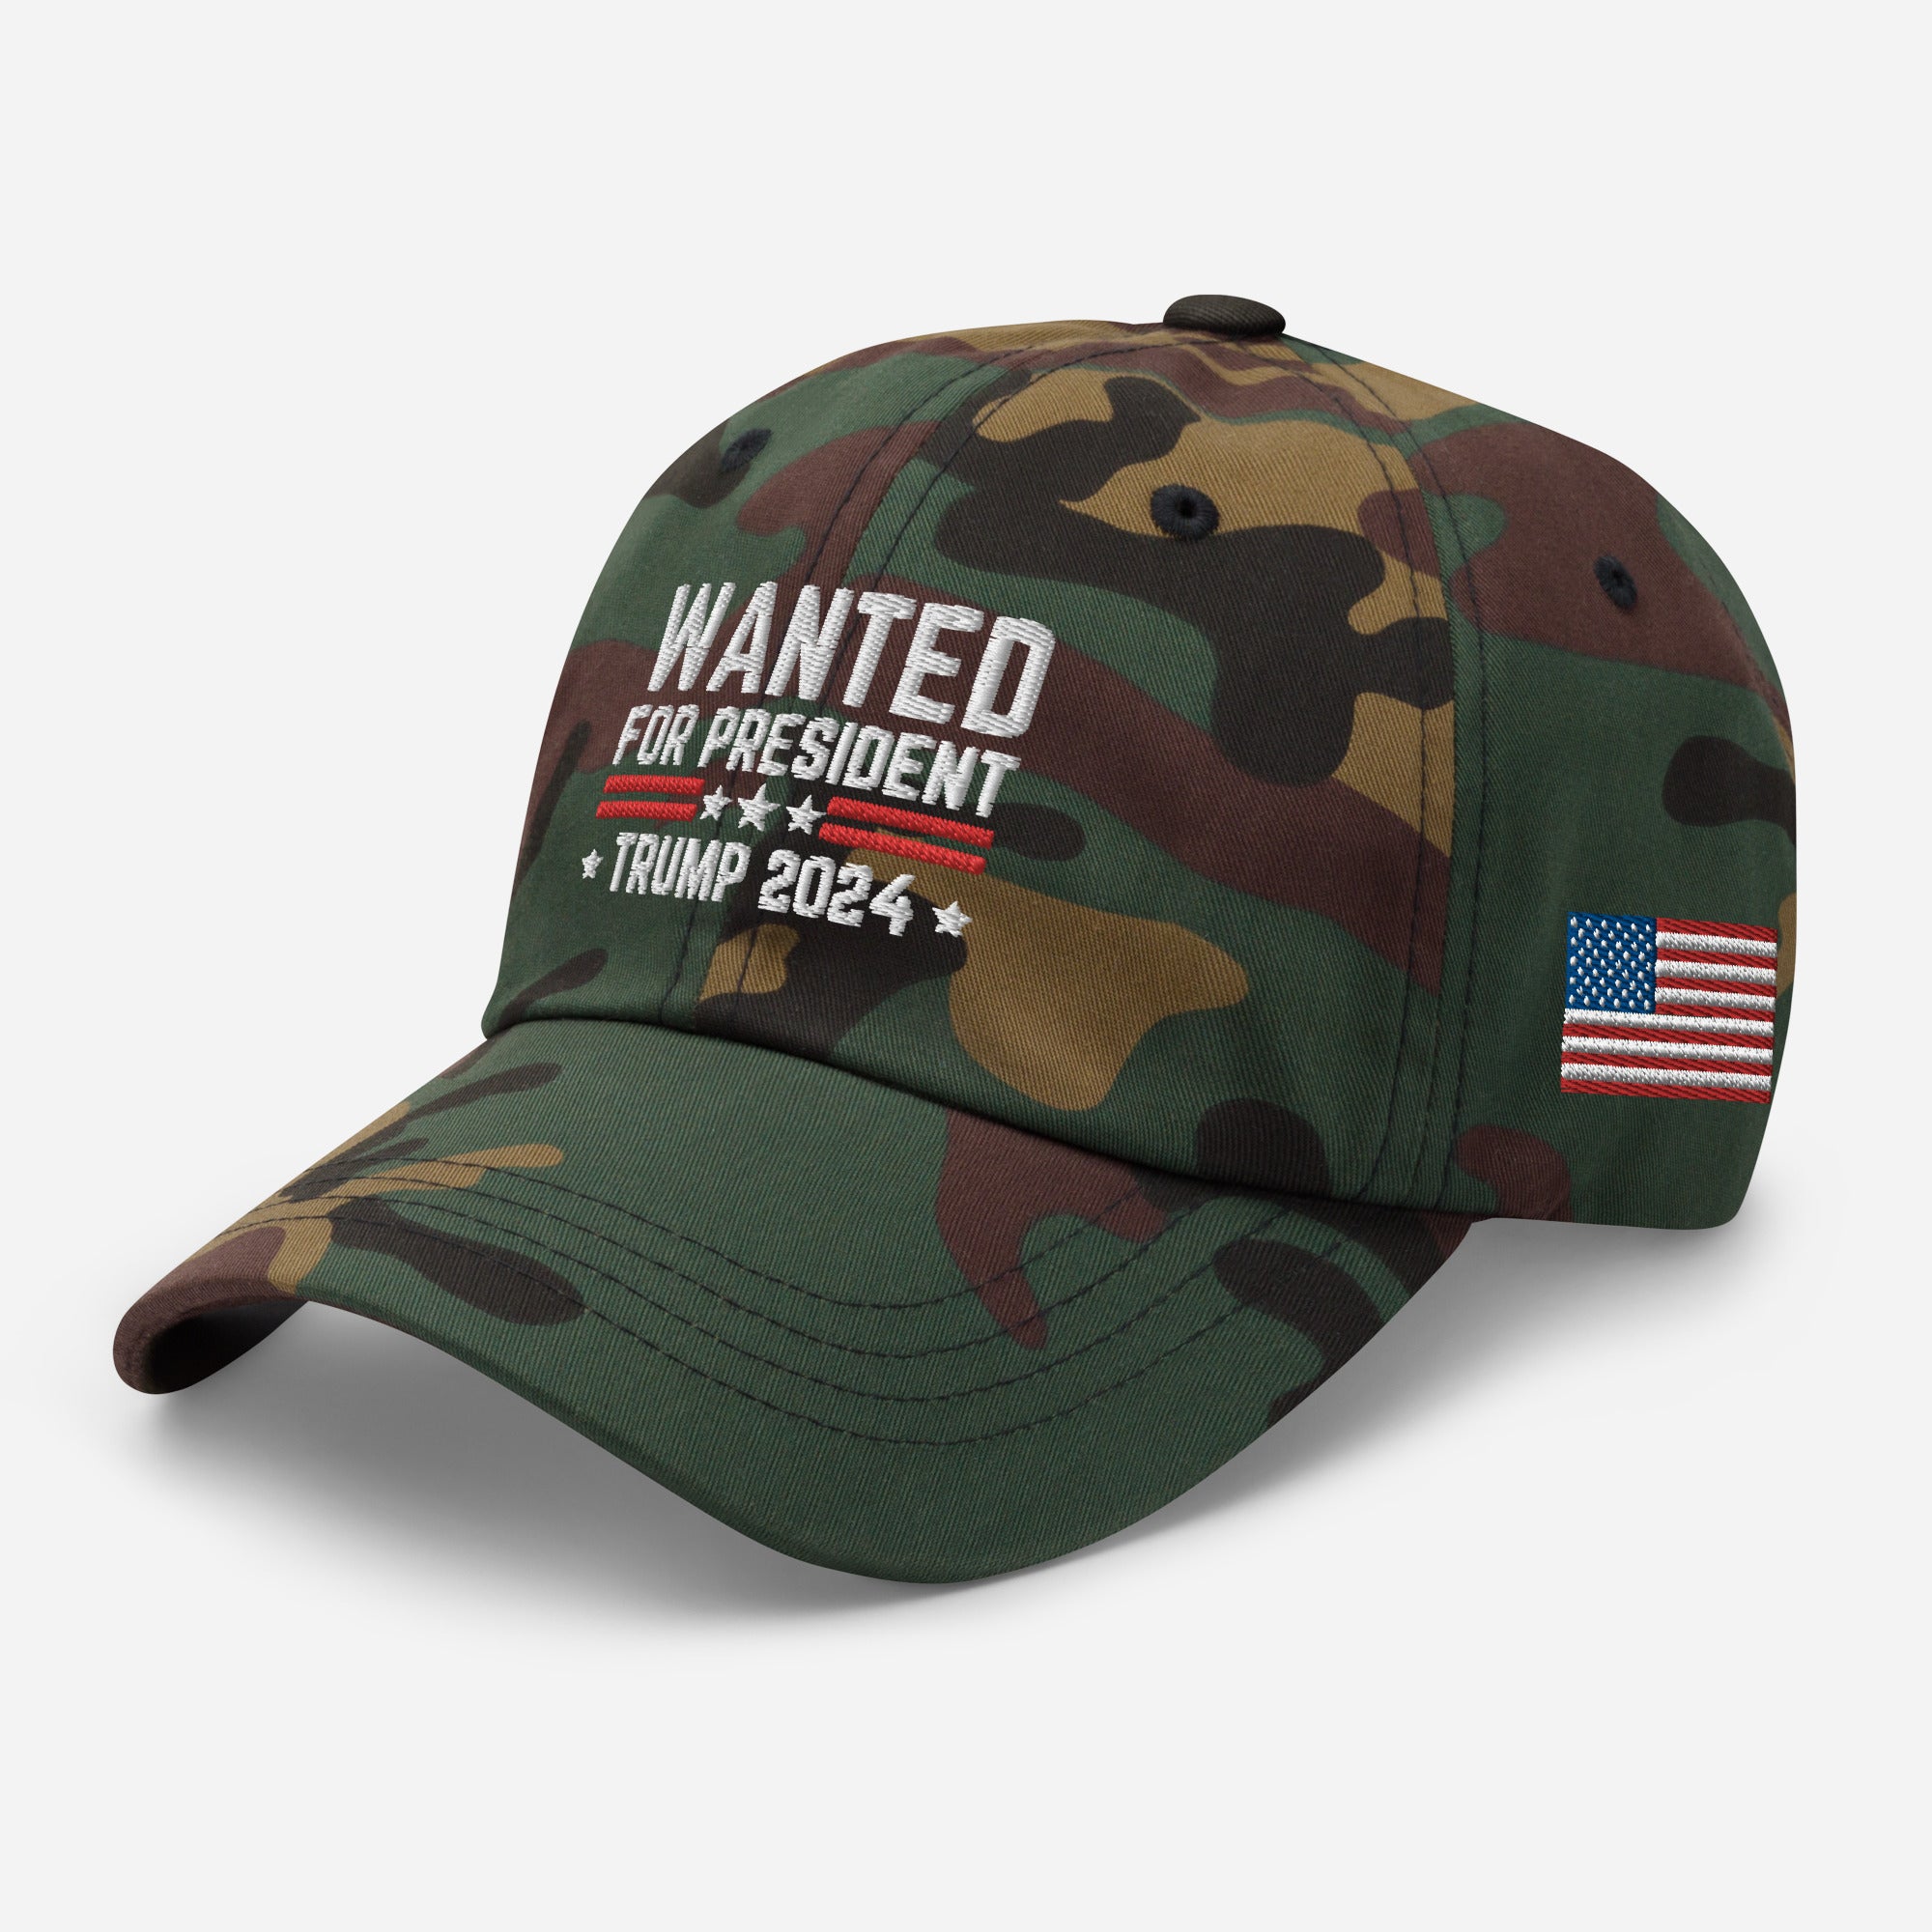 Wanted For President Hat, Trump 2024 Dad Hat, Republican Gift, Funny Trump Hat, White House Trump 2024, Political Cap, Election Day Hats